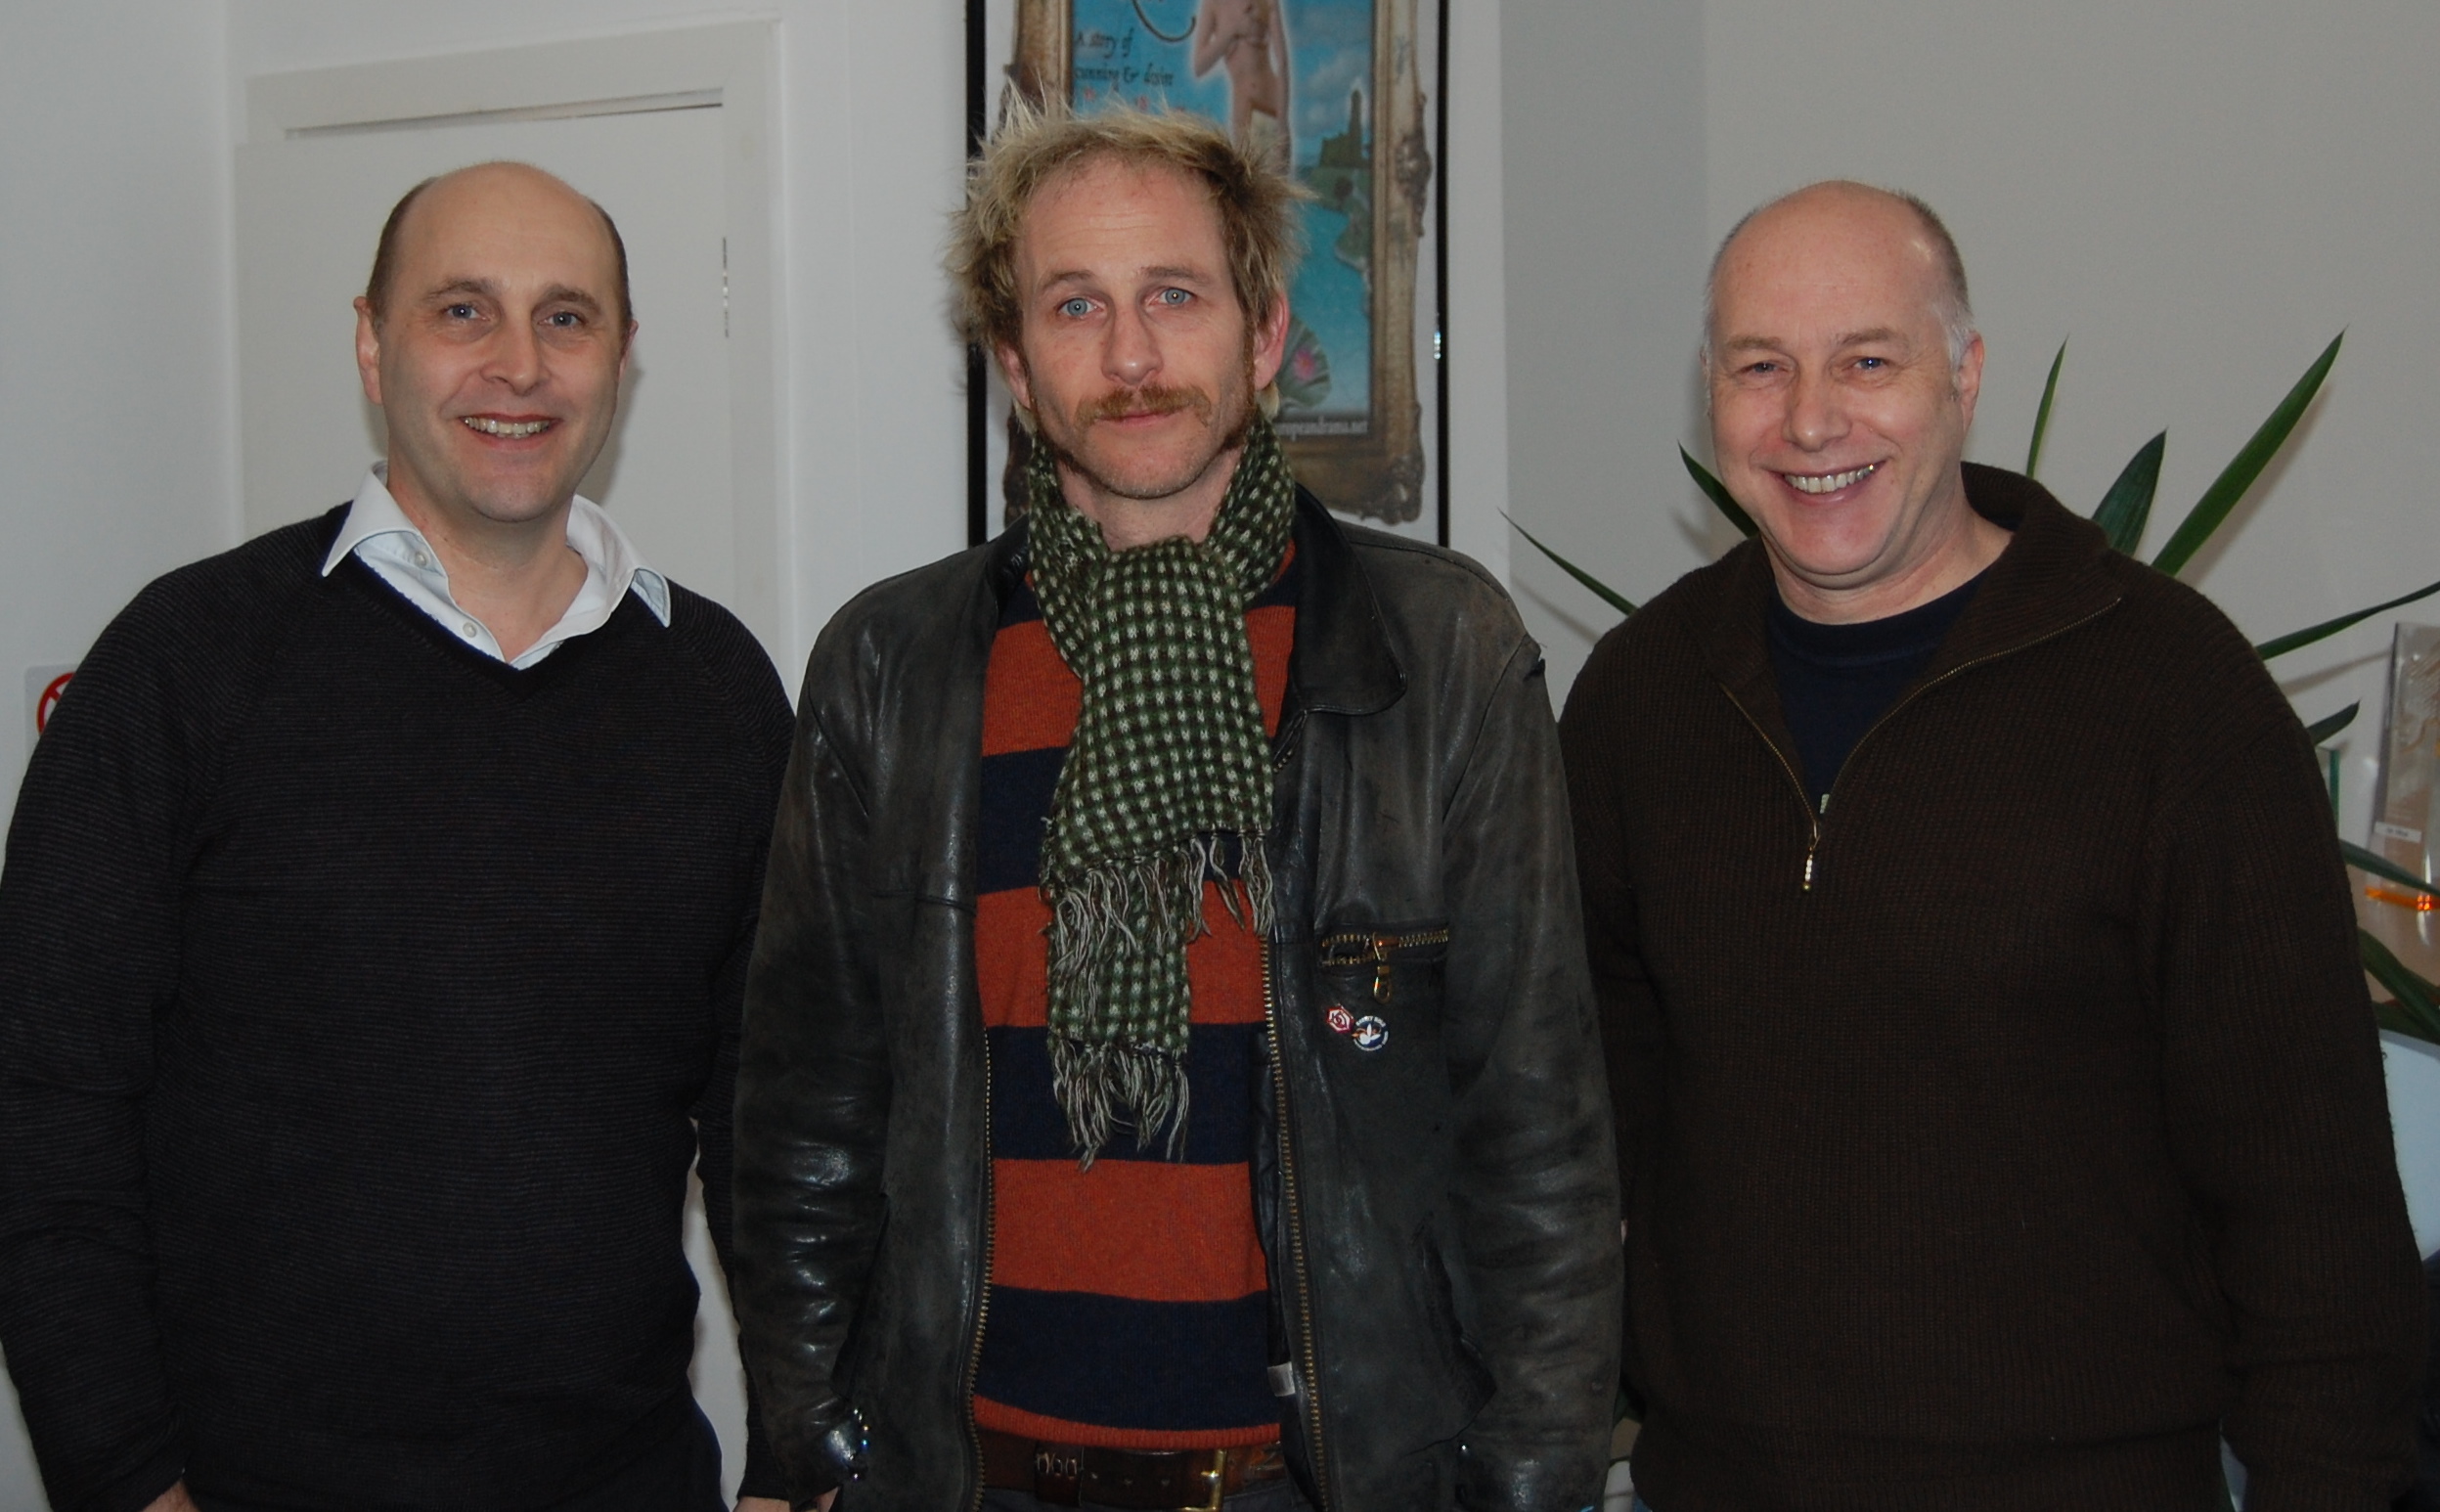 ADR Editor Mike Stewart, Paul Kaye (character: 'Kermit') and Neil Hillman MPSE. 'Shameless' Series 8 Episode 6 ADR session, December 1st 2010.